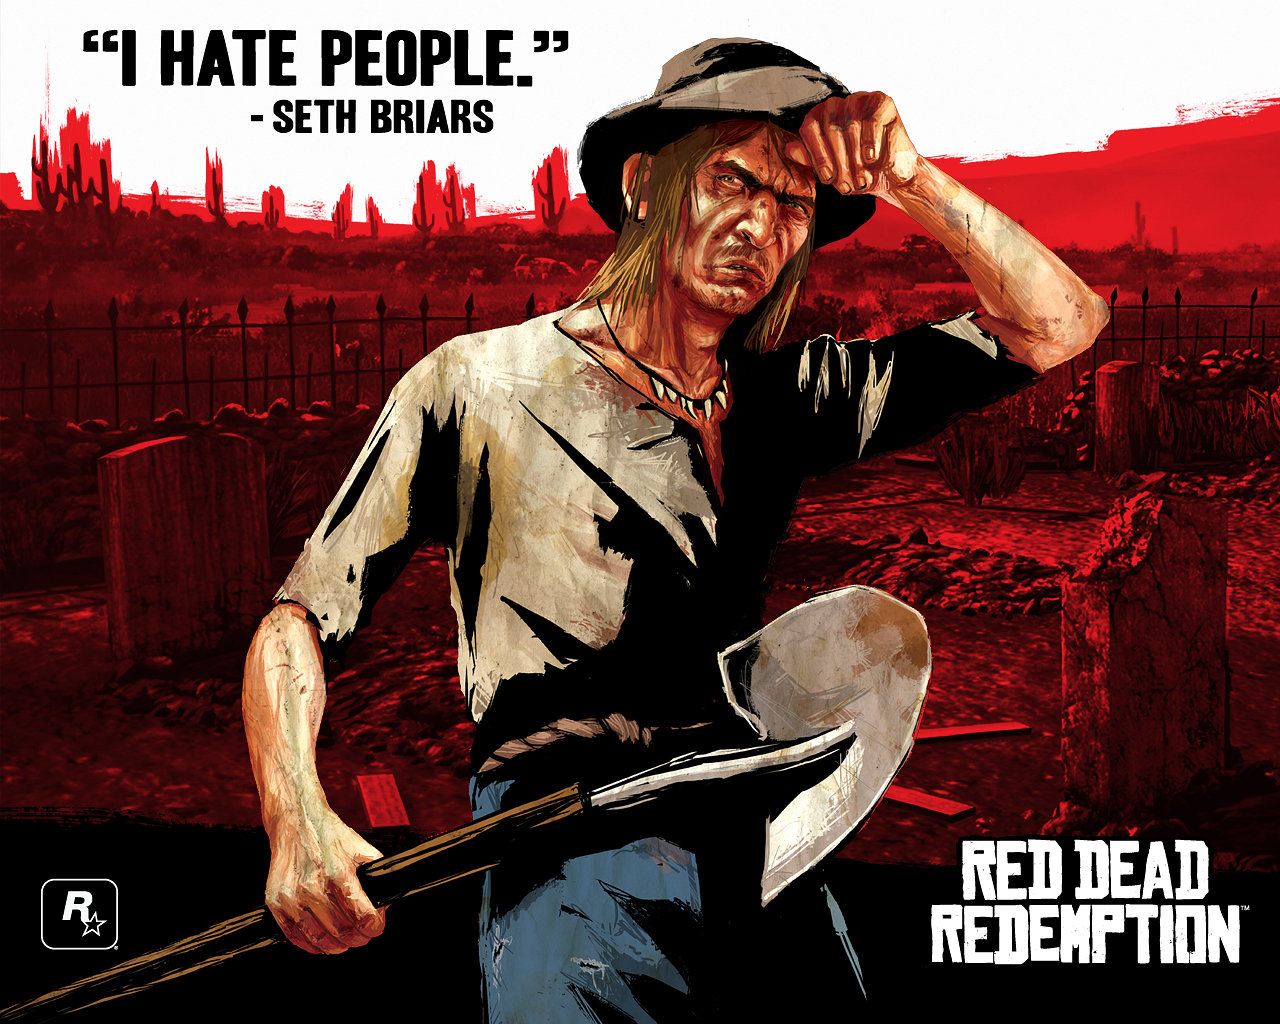 Download Hd Red Dead Redemption Computer Wallpaper - Red Dead 1 Characters - HD Wallpaper 